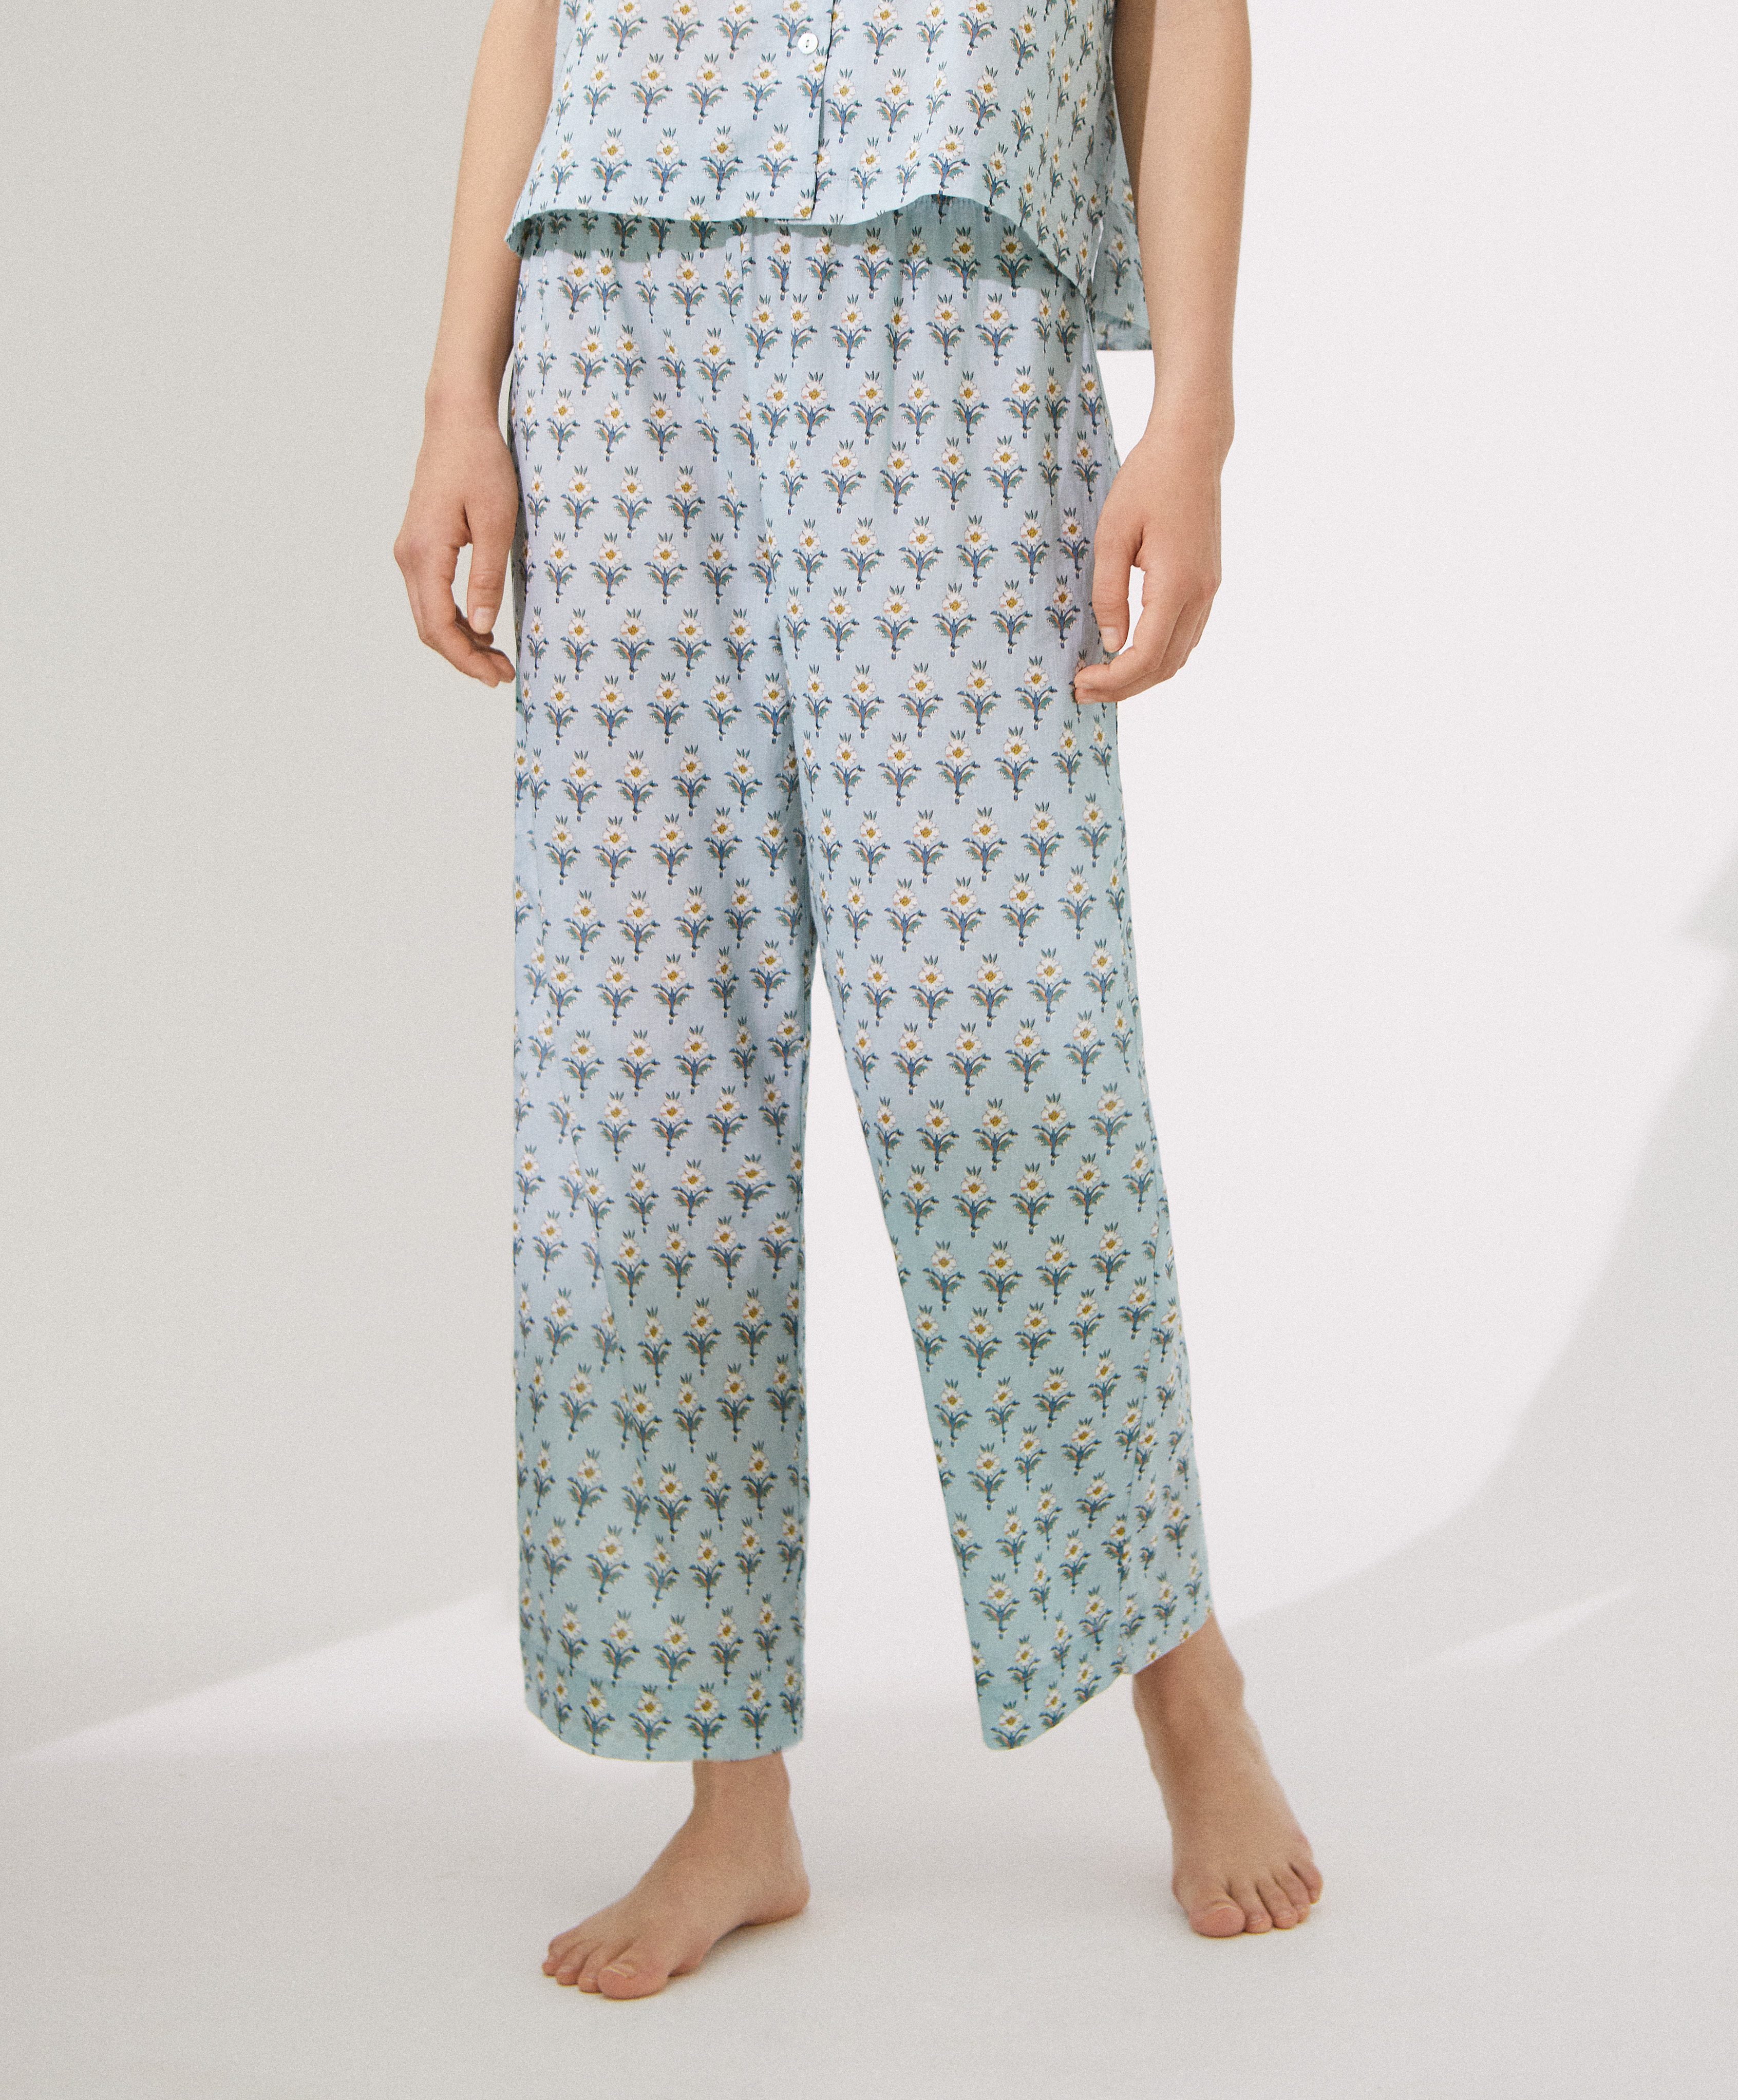 100% cotton printed trousers